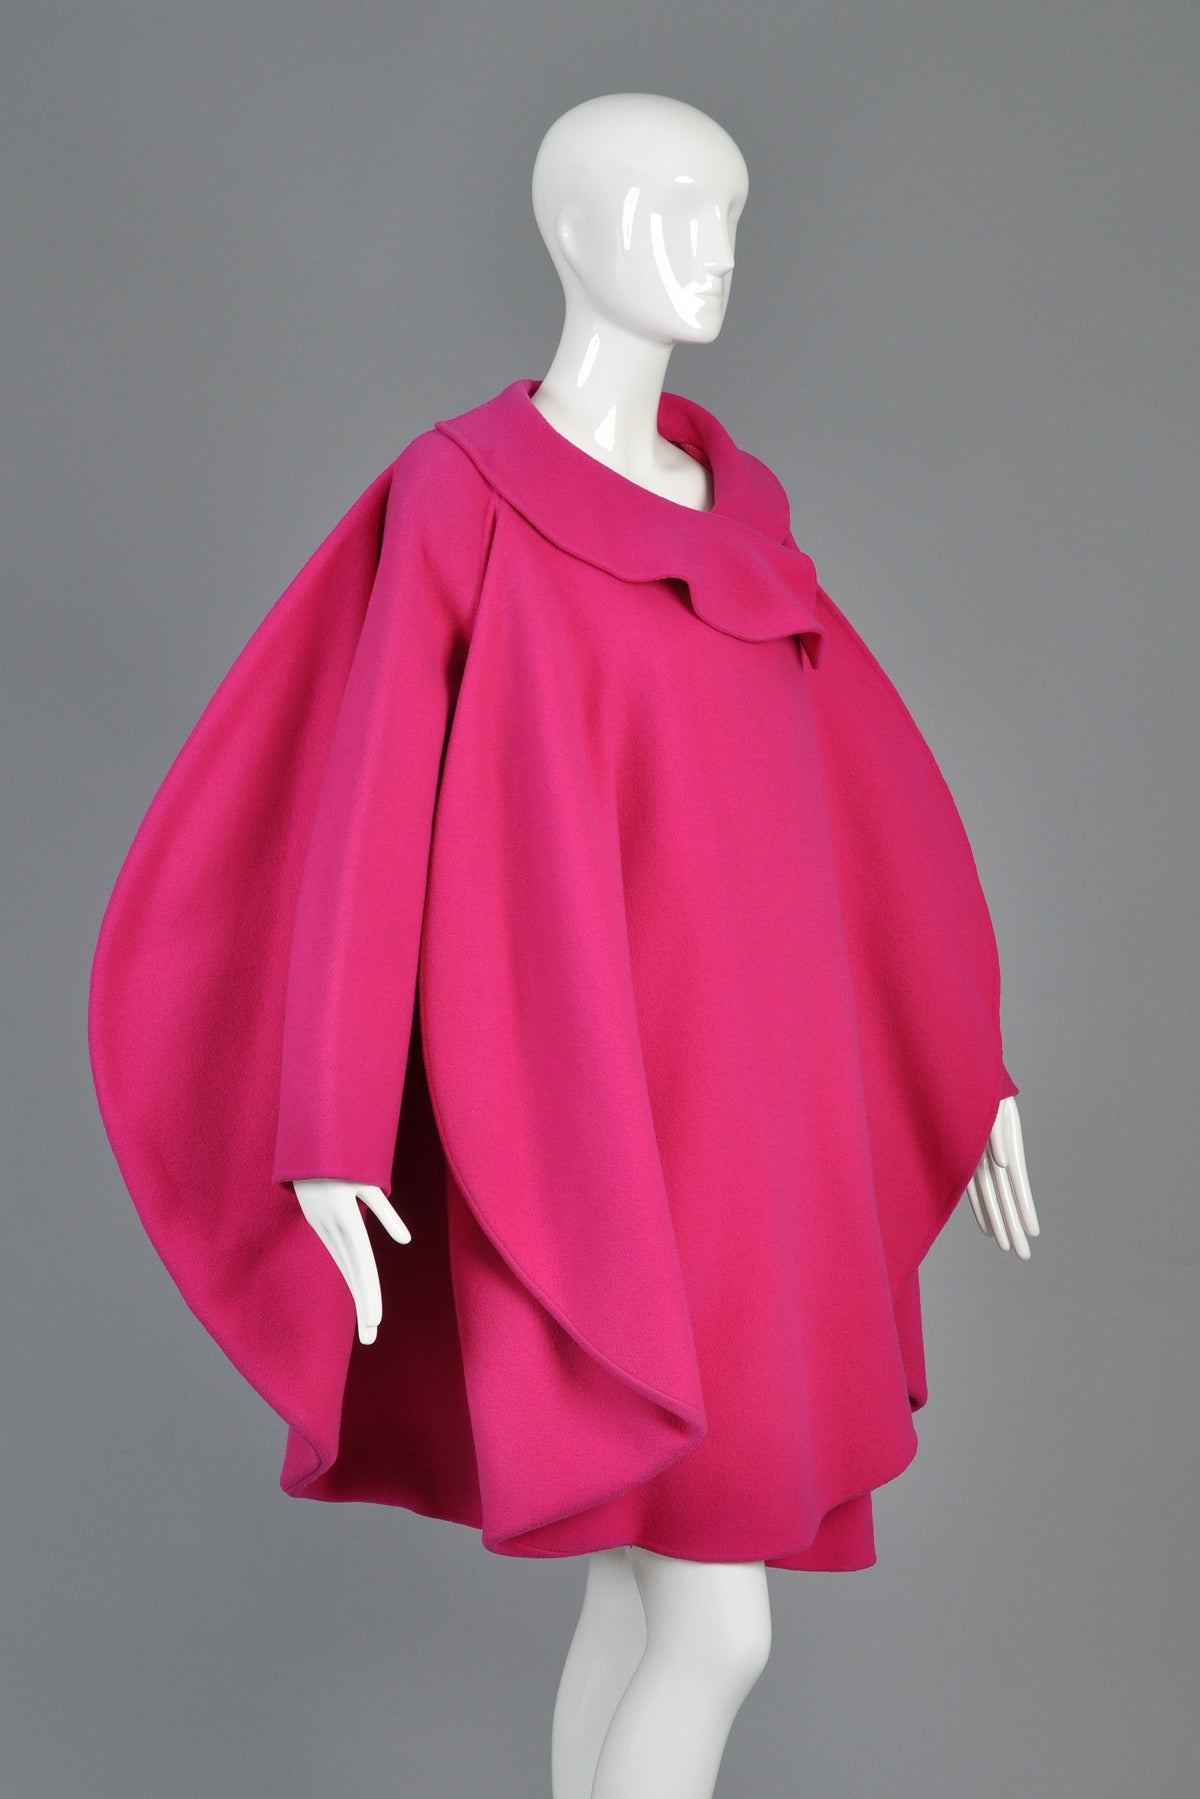 Women's Iconic 1987 Pierre Cardin Haute Couture Fin-Backed Coat For Sale